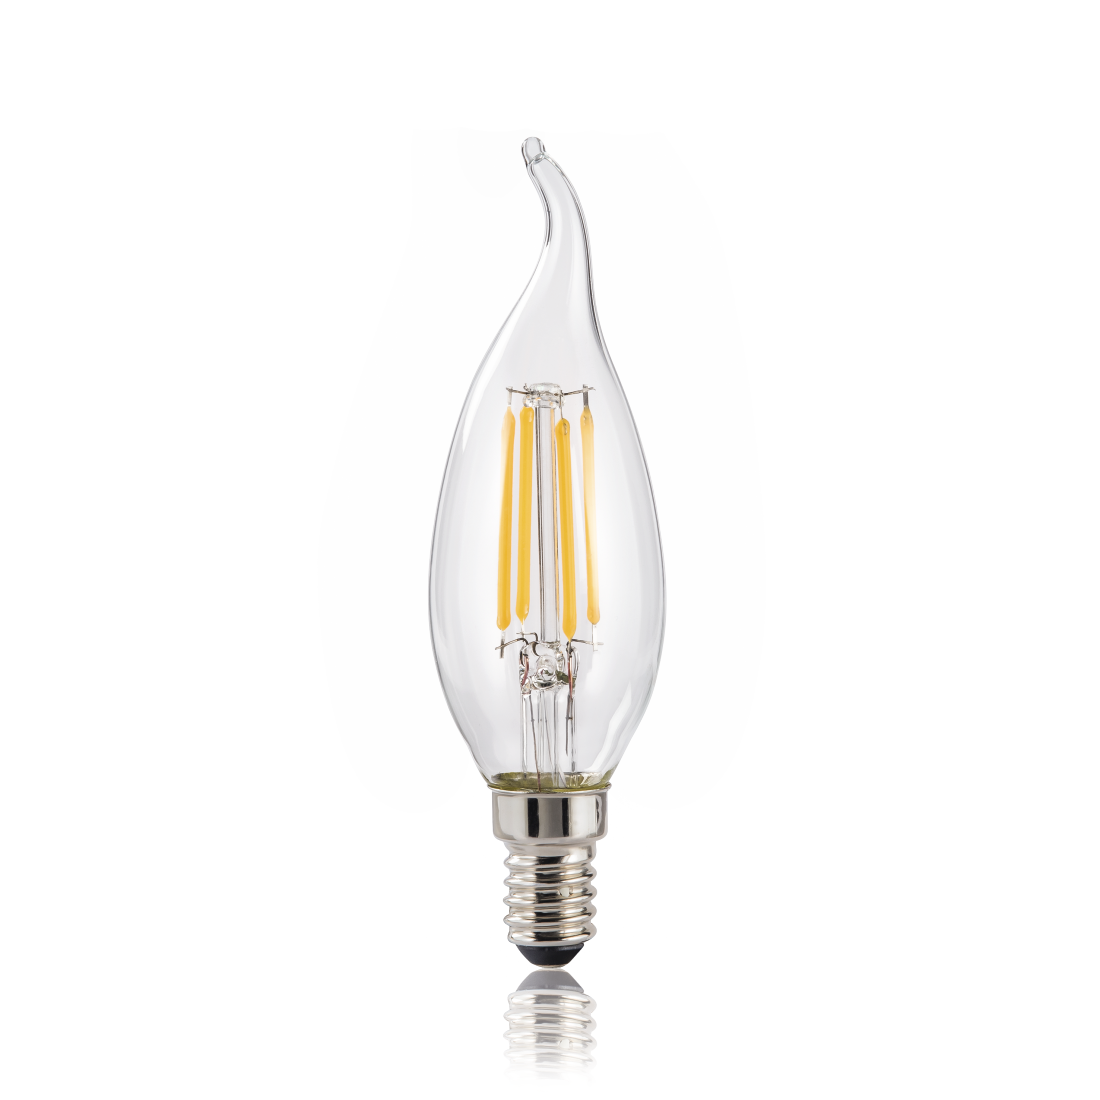 abx2 High-Res Image 2 - Xavax, LED Filament, E14, 470 lm replaces 40 W, Flickering Candle, warm white